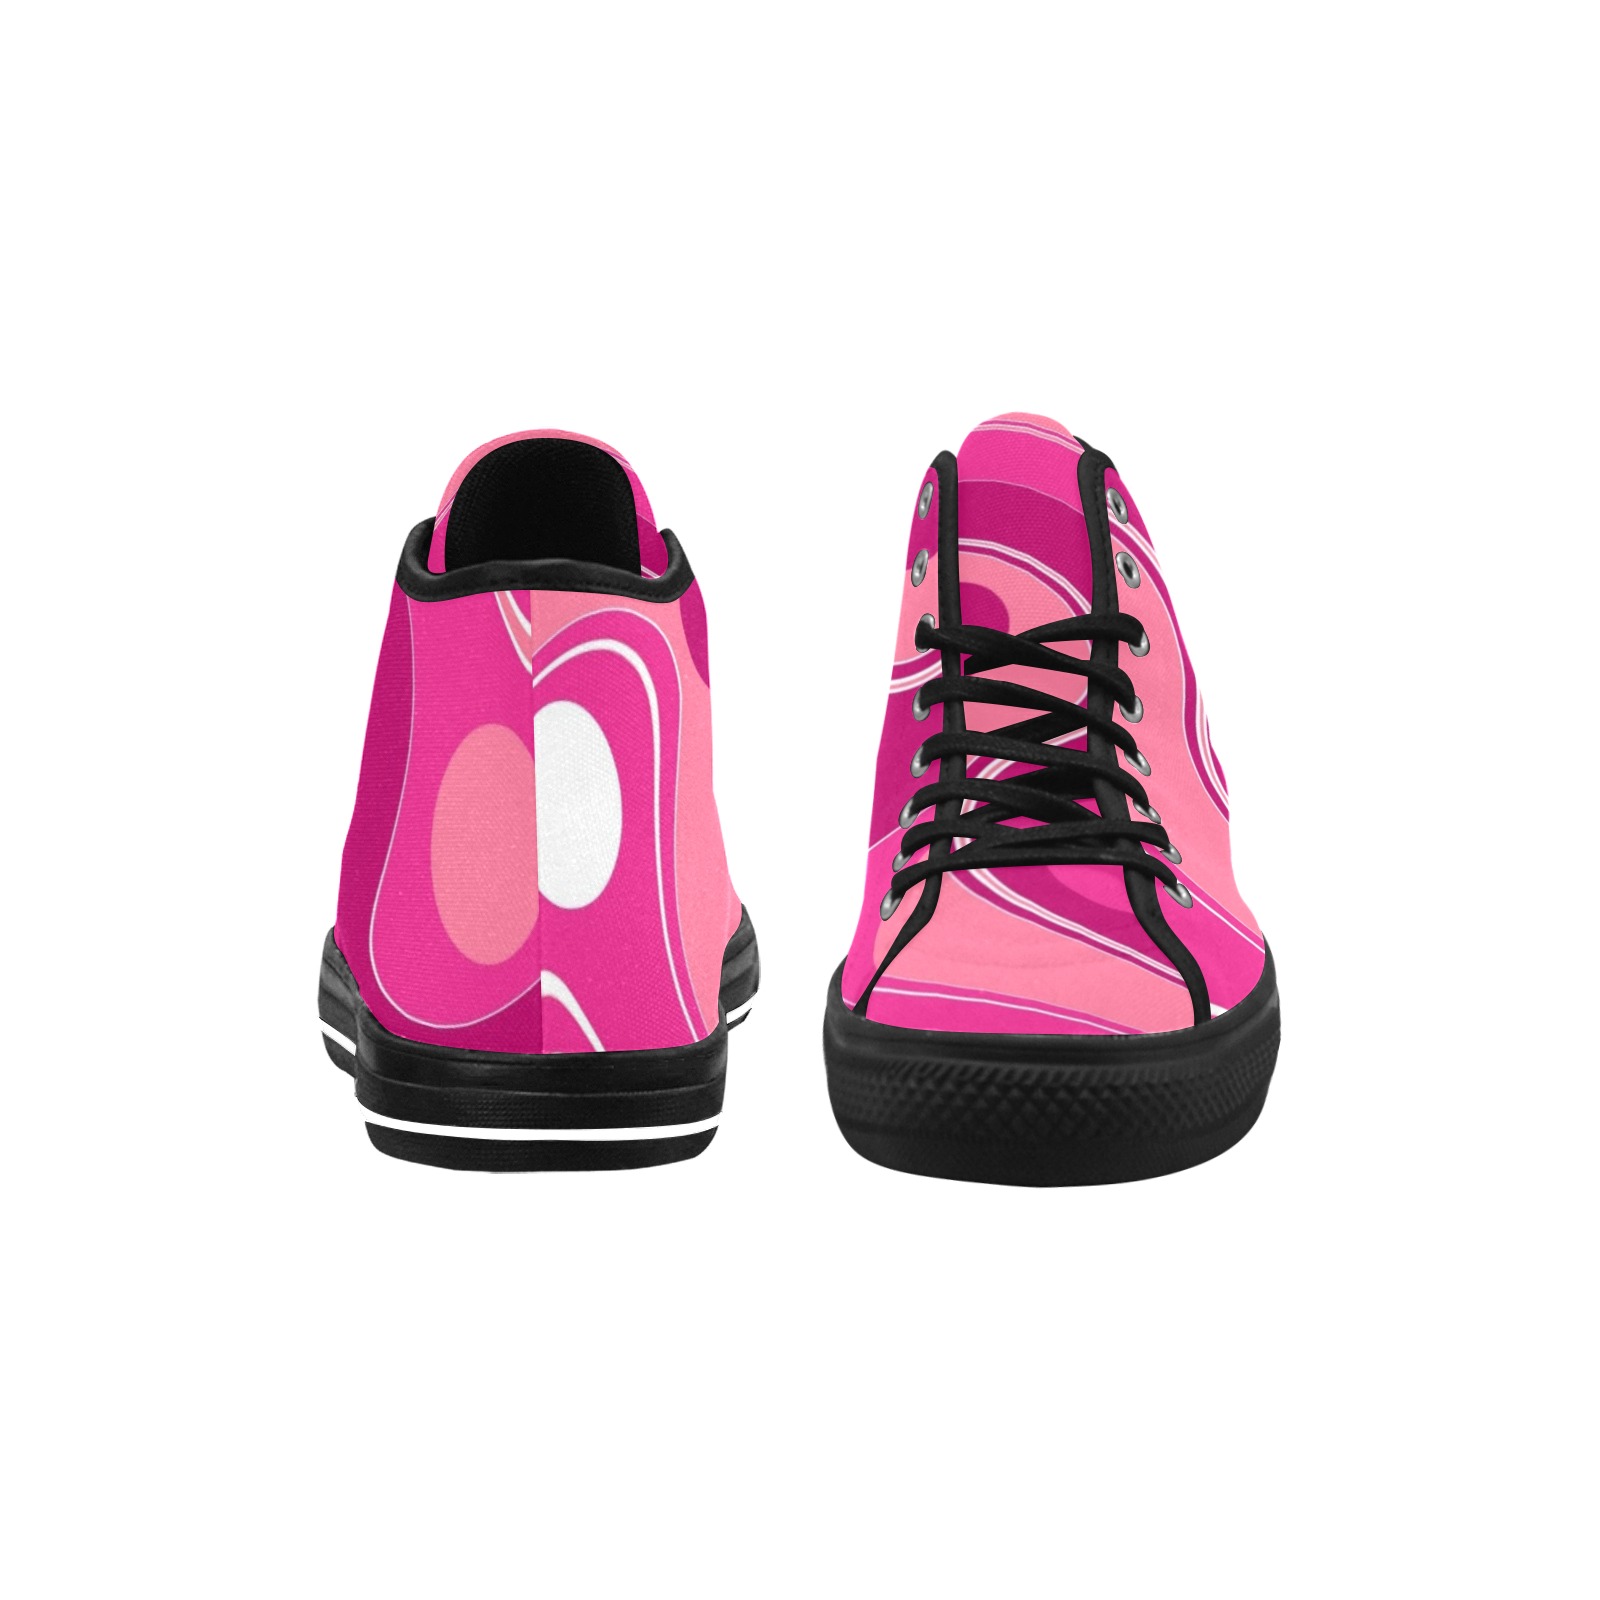 IN THE PINK-122 ALT Vancouver H Men's Canvas Shoes (1013-1)